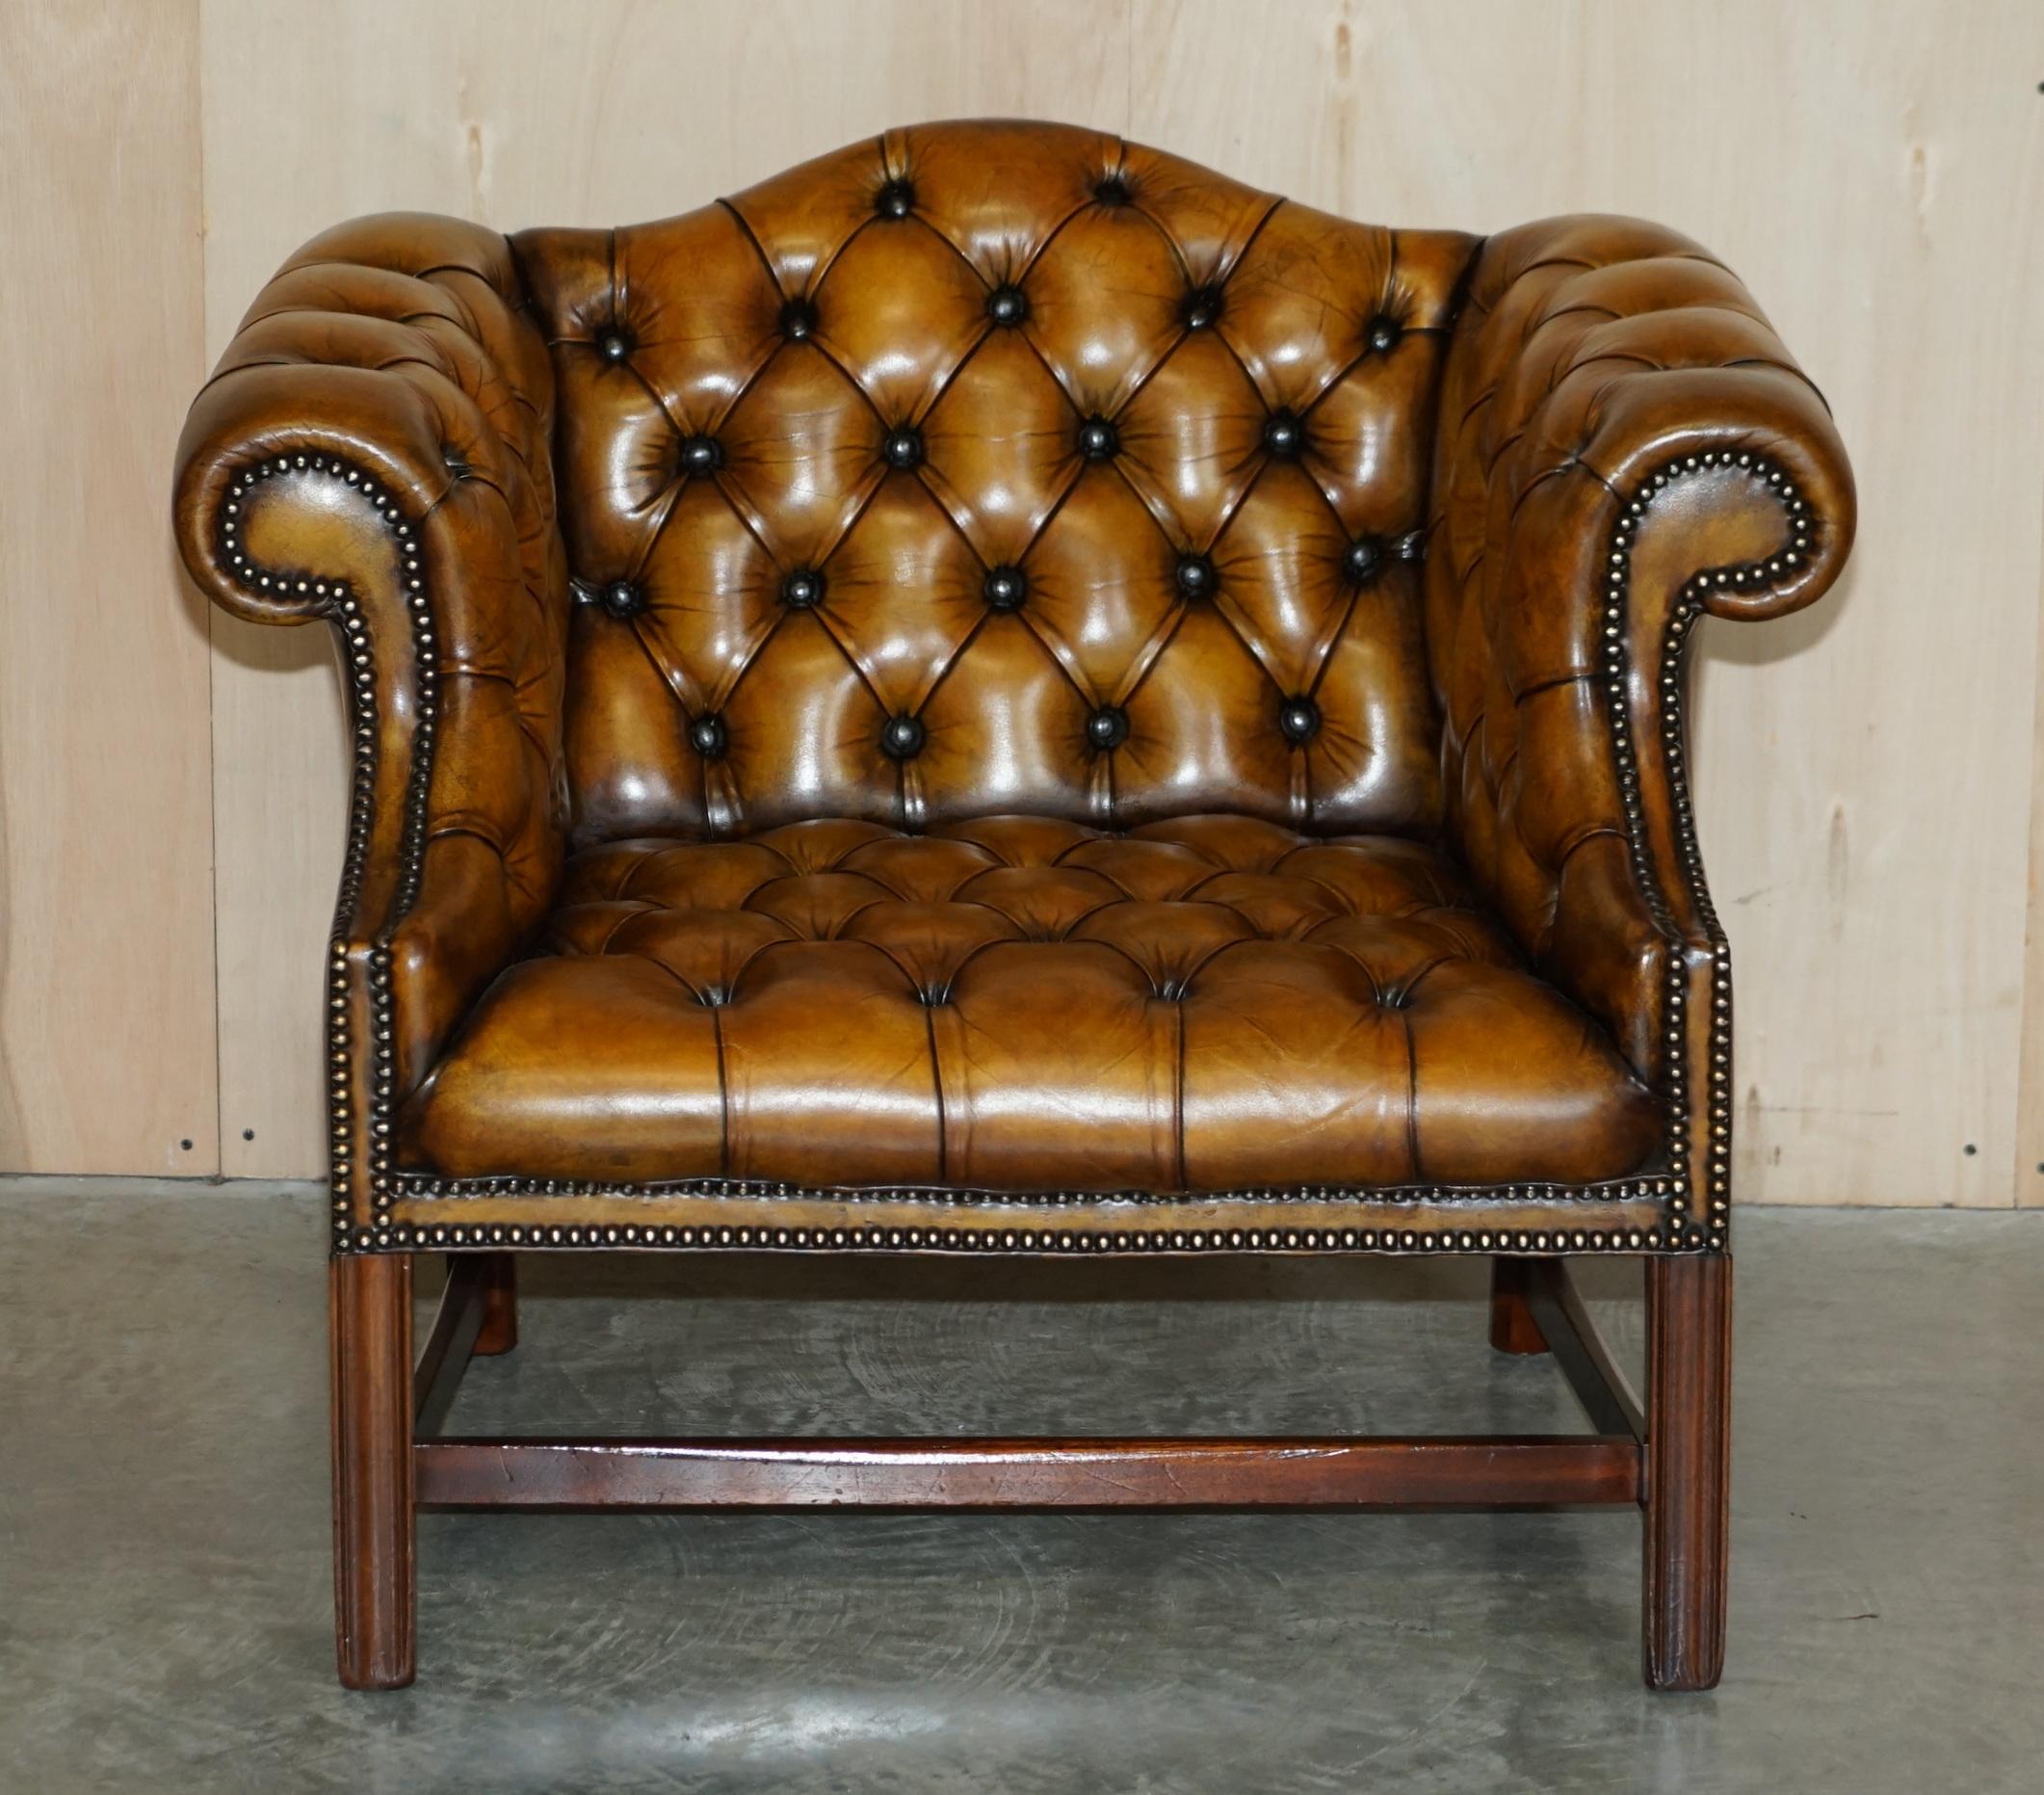 English Antique Restored Brown Leather Chesterfield Library Armchairs Sofa Stool Suite For Sale